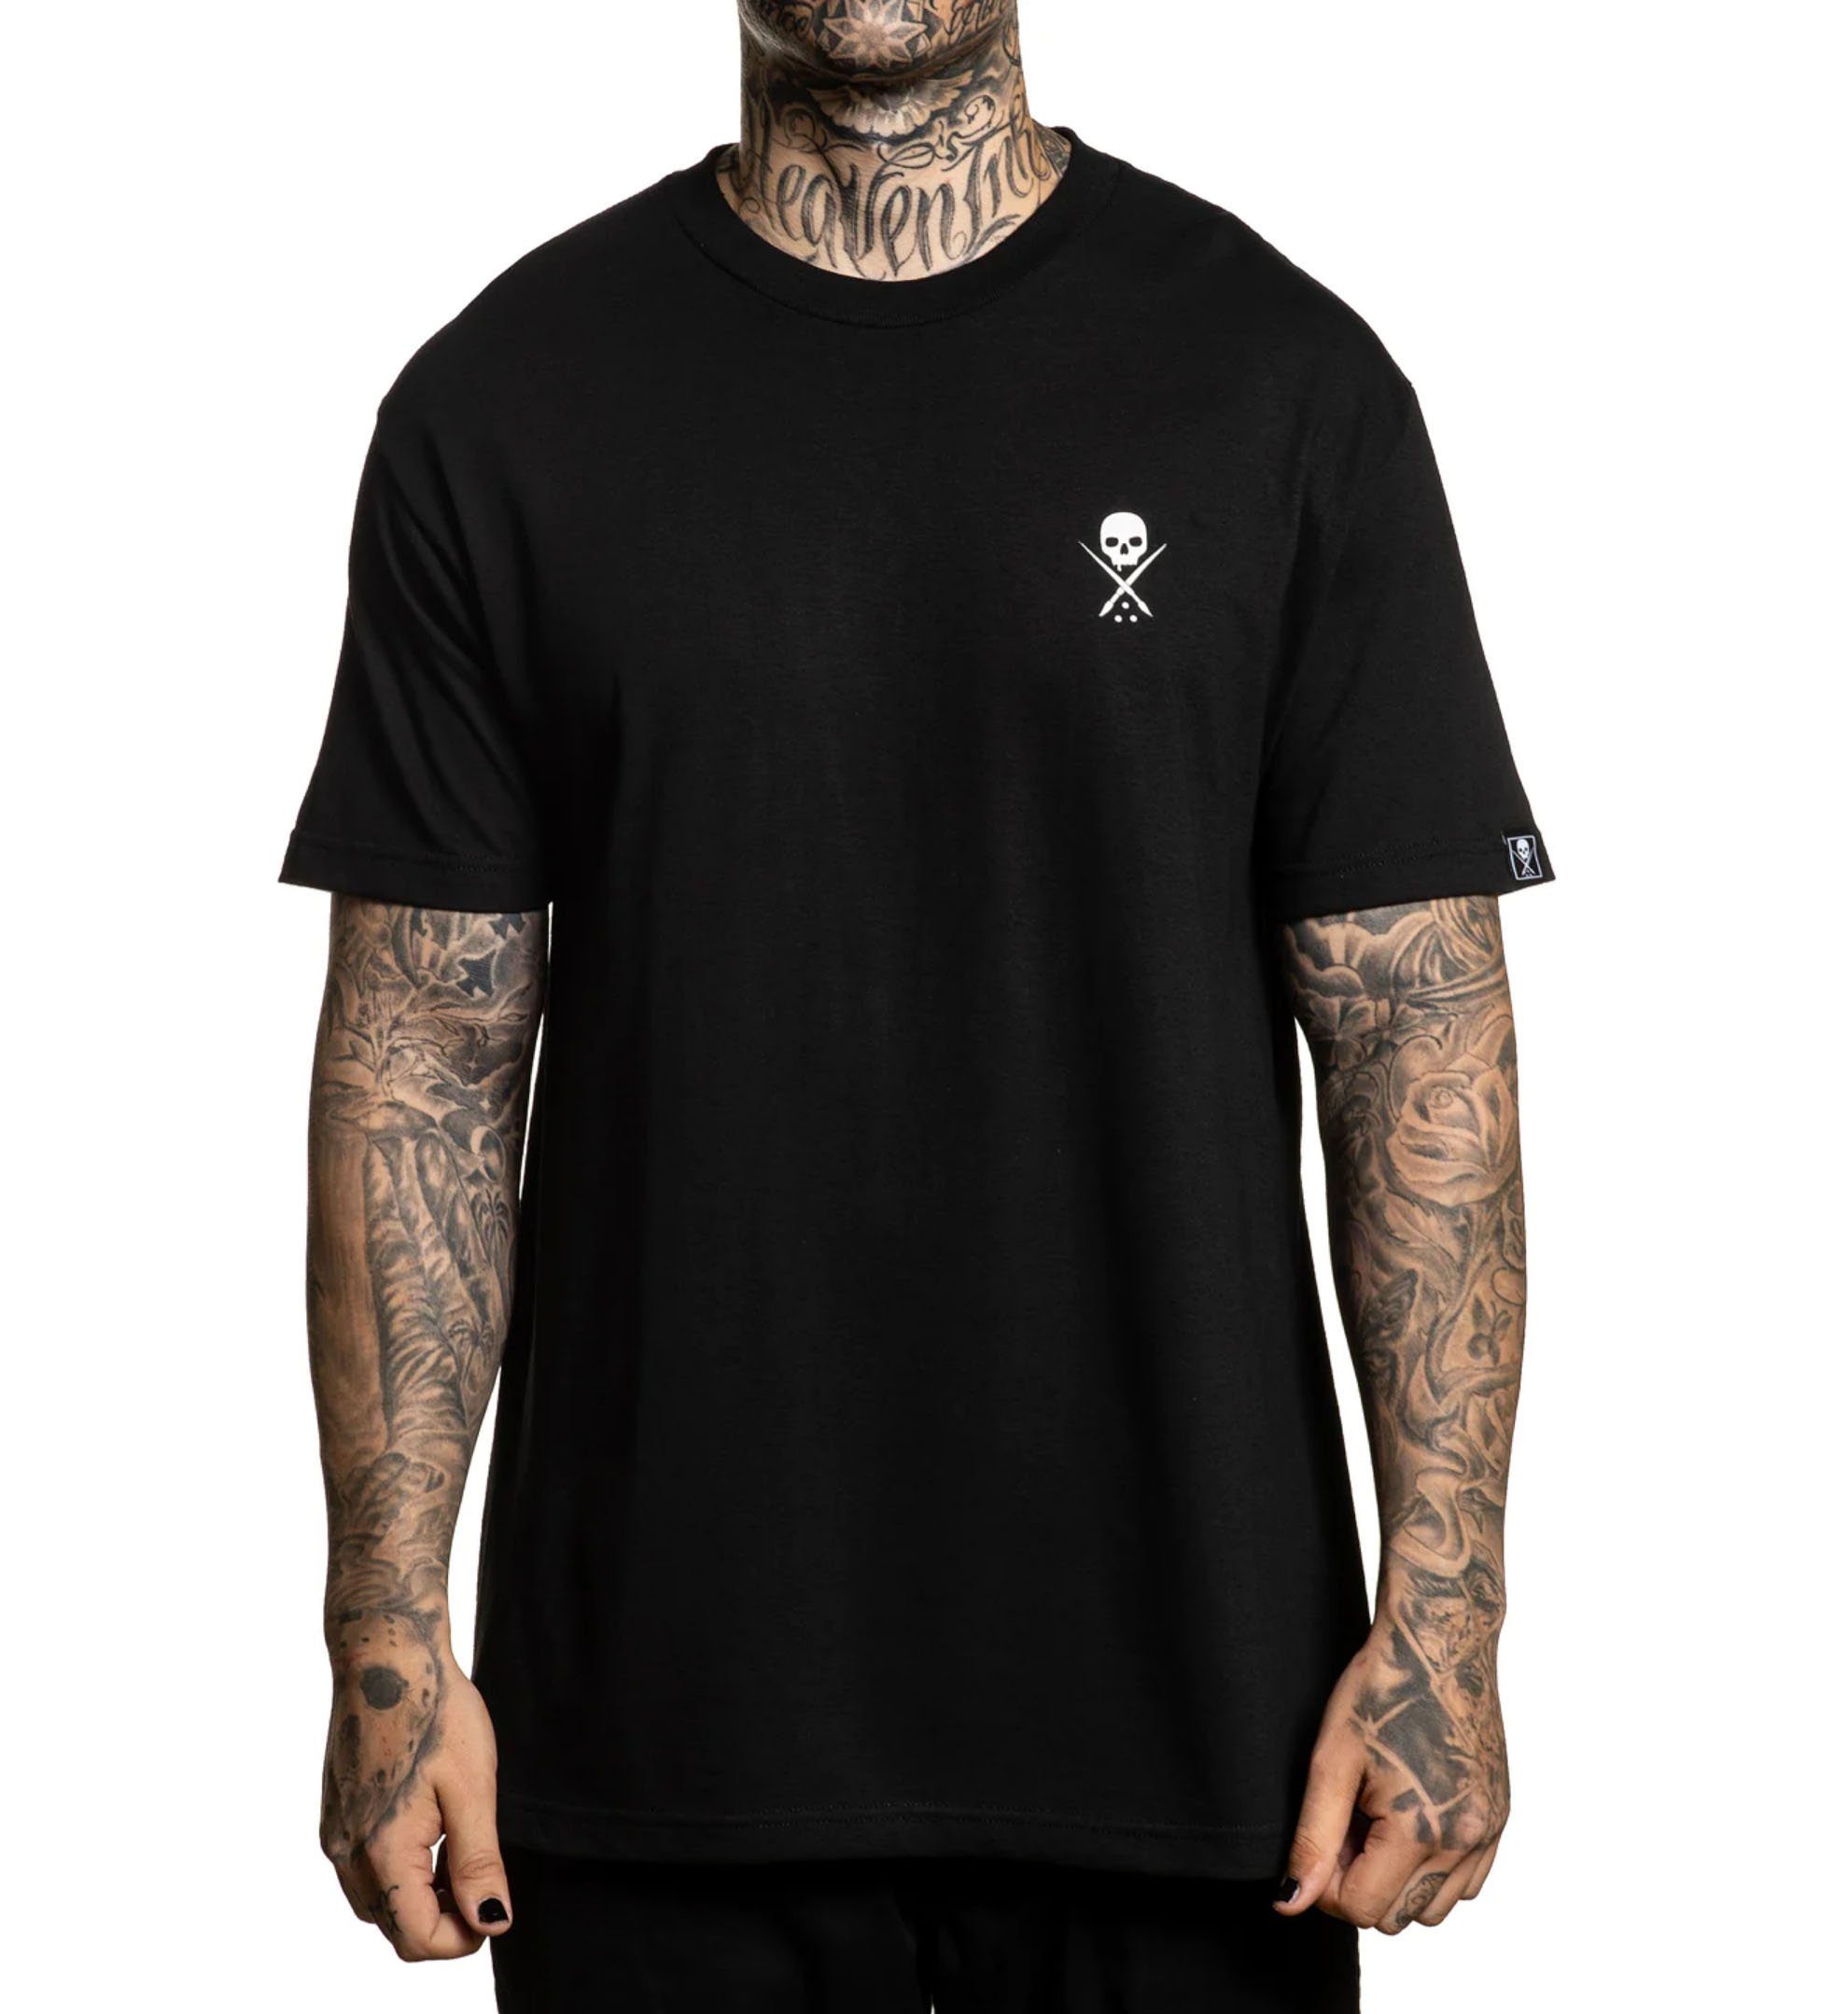 Sullen Clothing T-Shirt Standard Issue